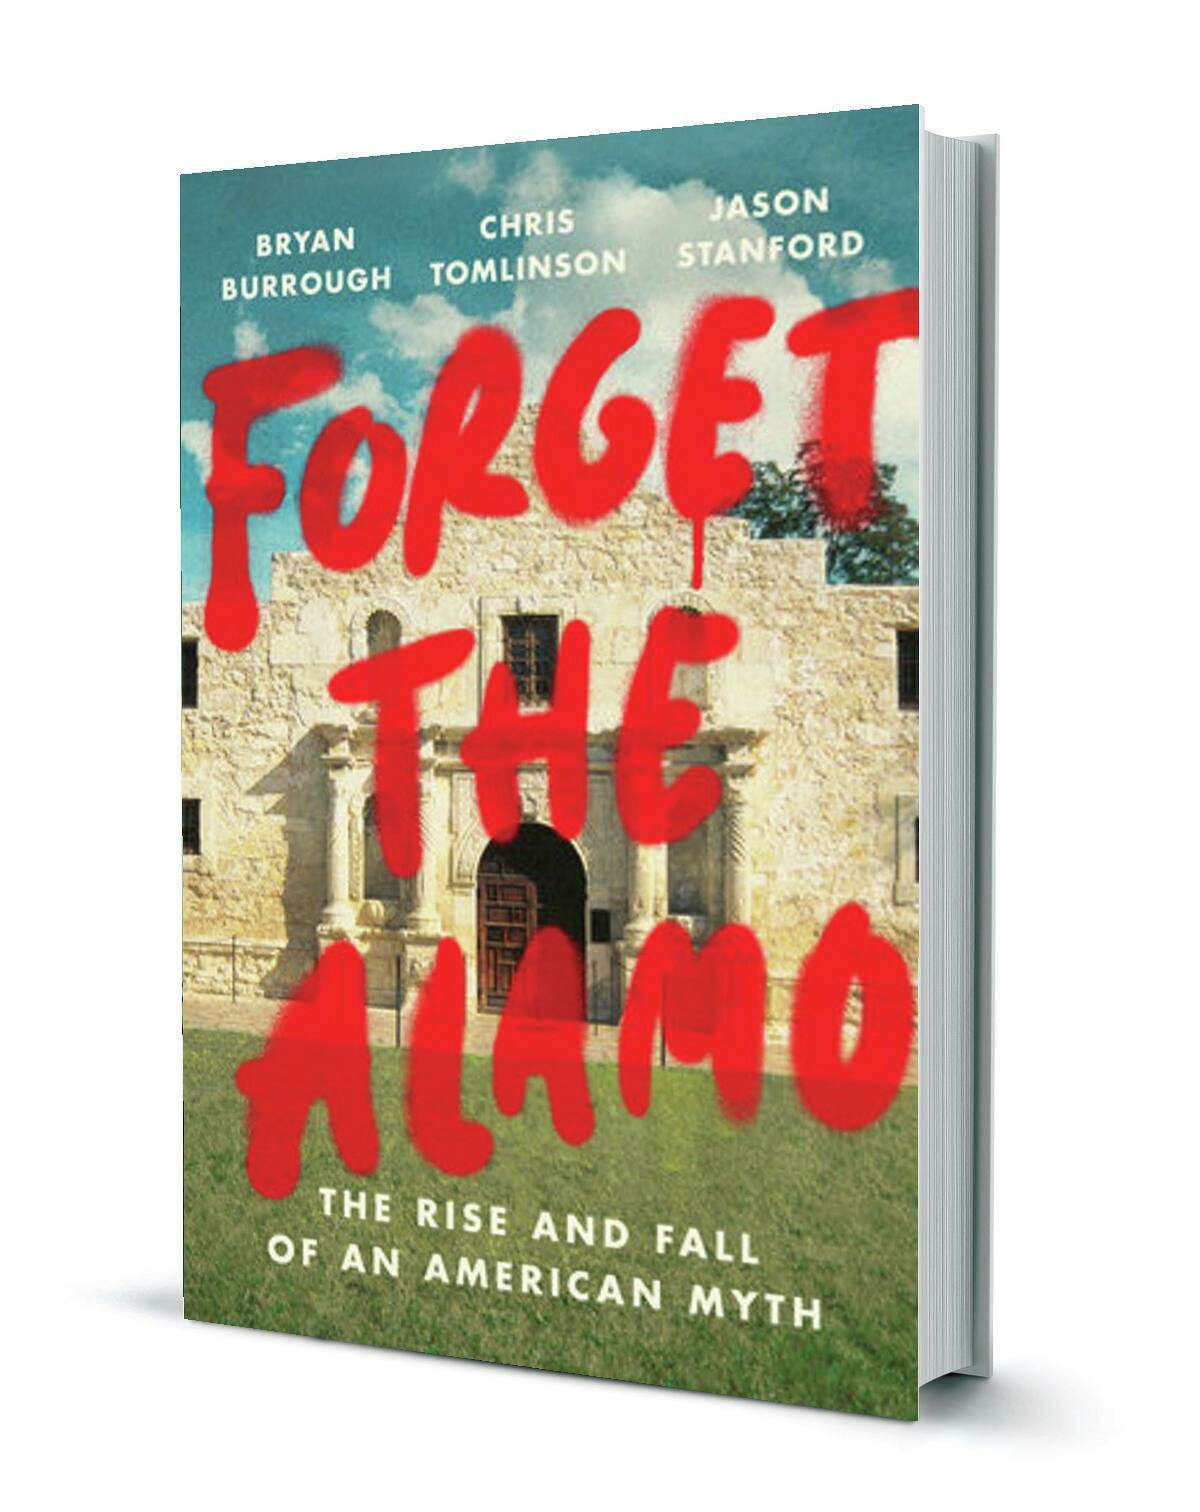 Forget the Alamo: The Rise and Fall of an American Myth Hardcover - June 8, 2021, by Bryan Burrough, Chris Tomlinson, Jason Stanford